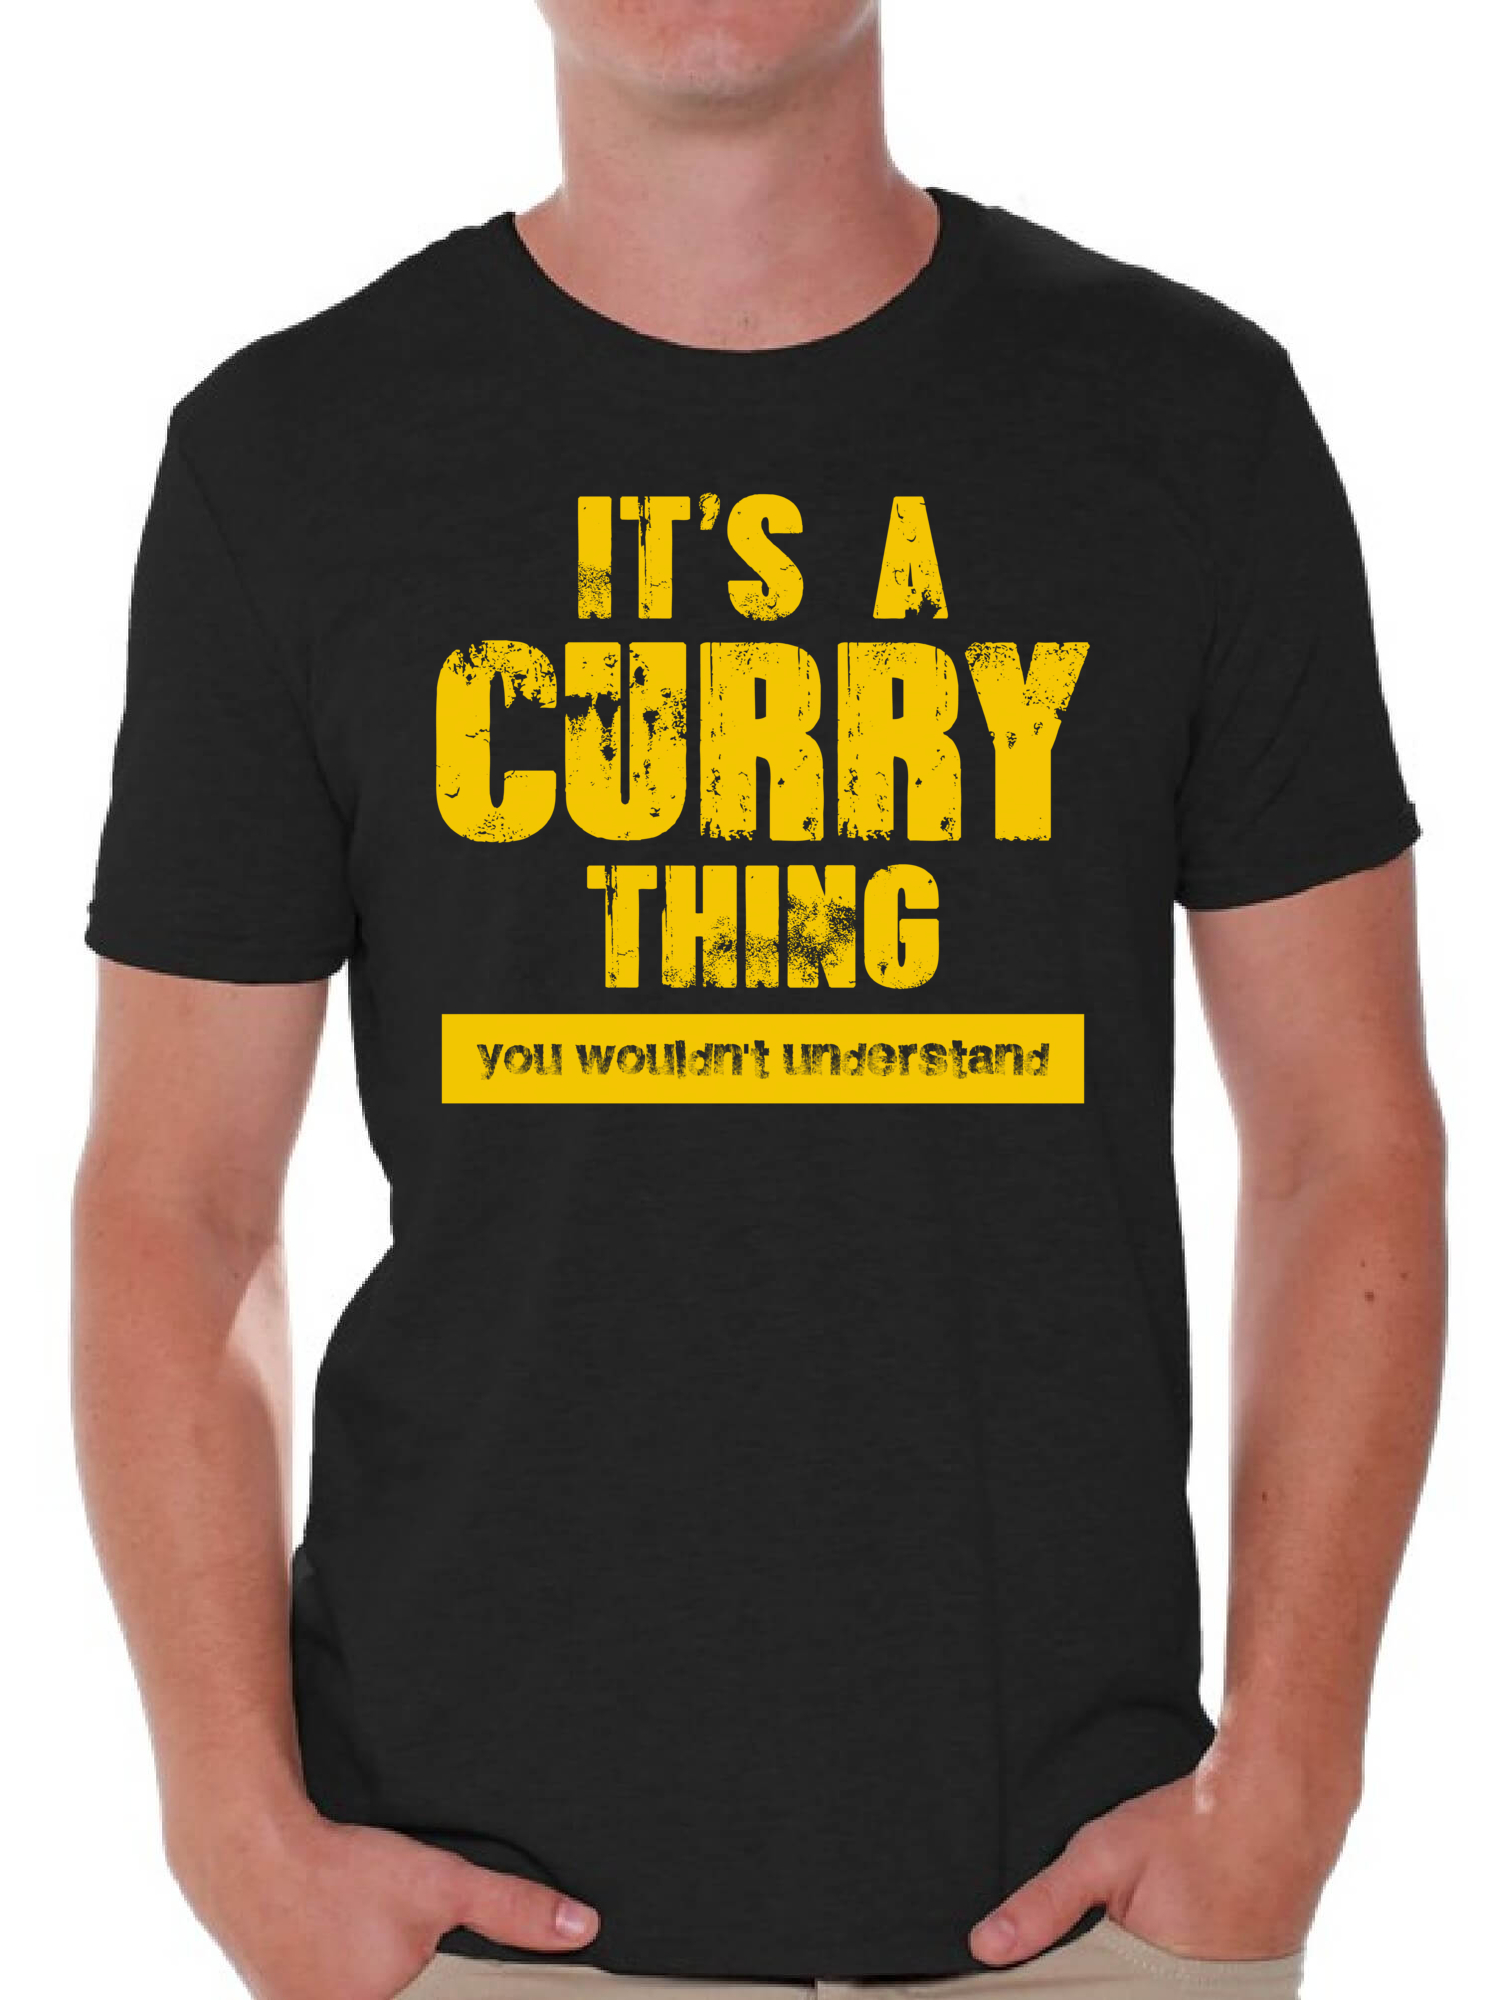 Awkward Styles It's a Curry Thing T Shirt for Men Spiced Shirts for Men Men's Fashion Collection Sauce Tshirt for Dad Indian Curry T-Shirt for Men Gifts for Husband It's a Curry Thing Shirts - image 1 of 4